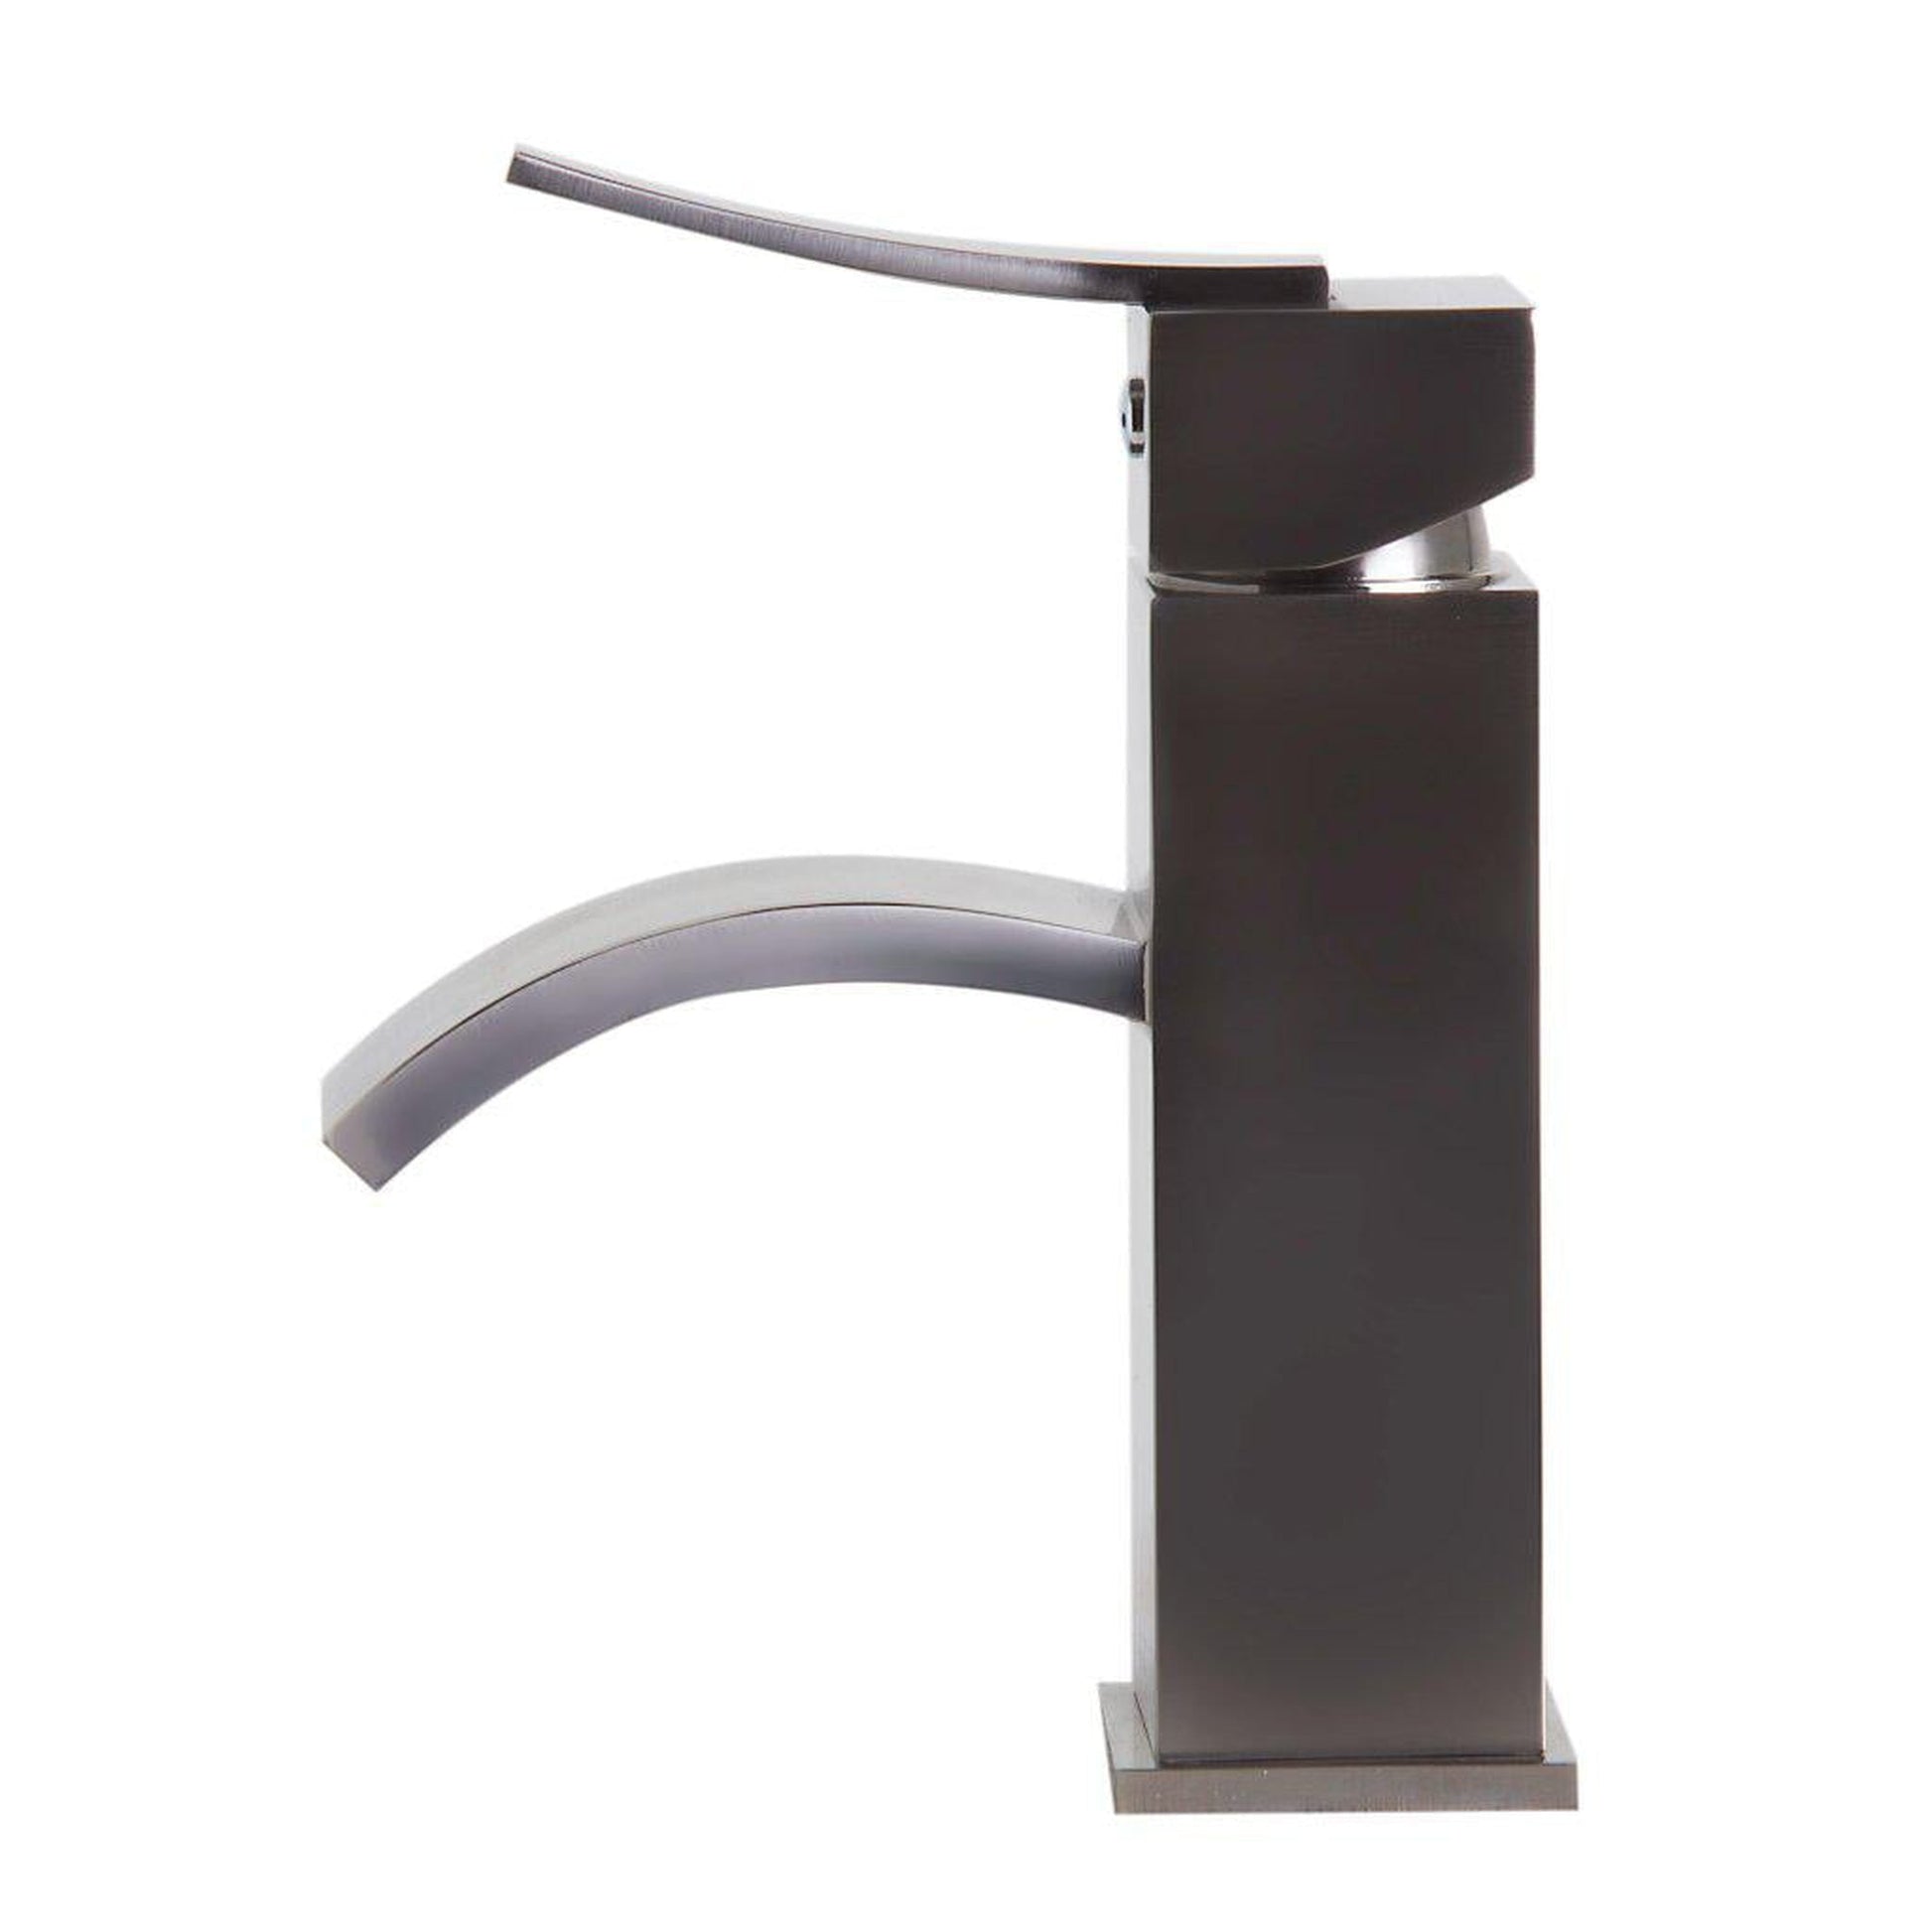 ALFI Brand AB1258-BN Brushed Nickel Single Hole Square Body Curved Spout Brass Bathroom Sink Faucet With Single Lever